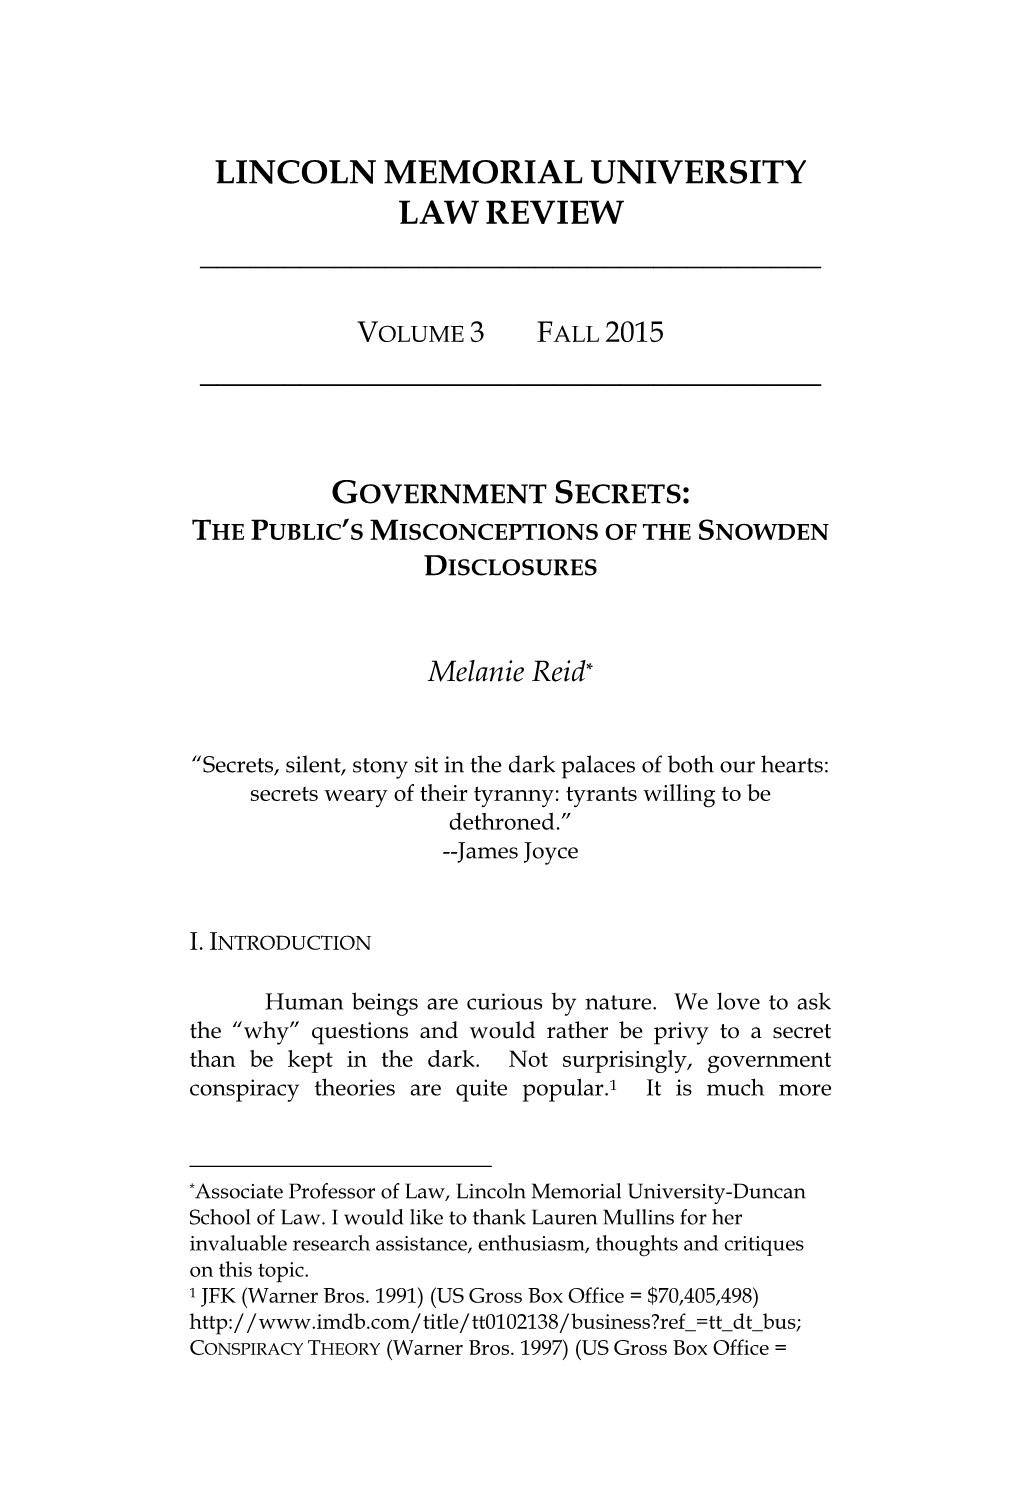 Government Secrets: the Public’S Misconceptions of the Snowden Disclosures